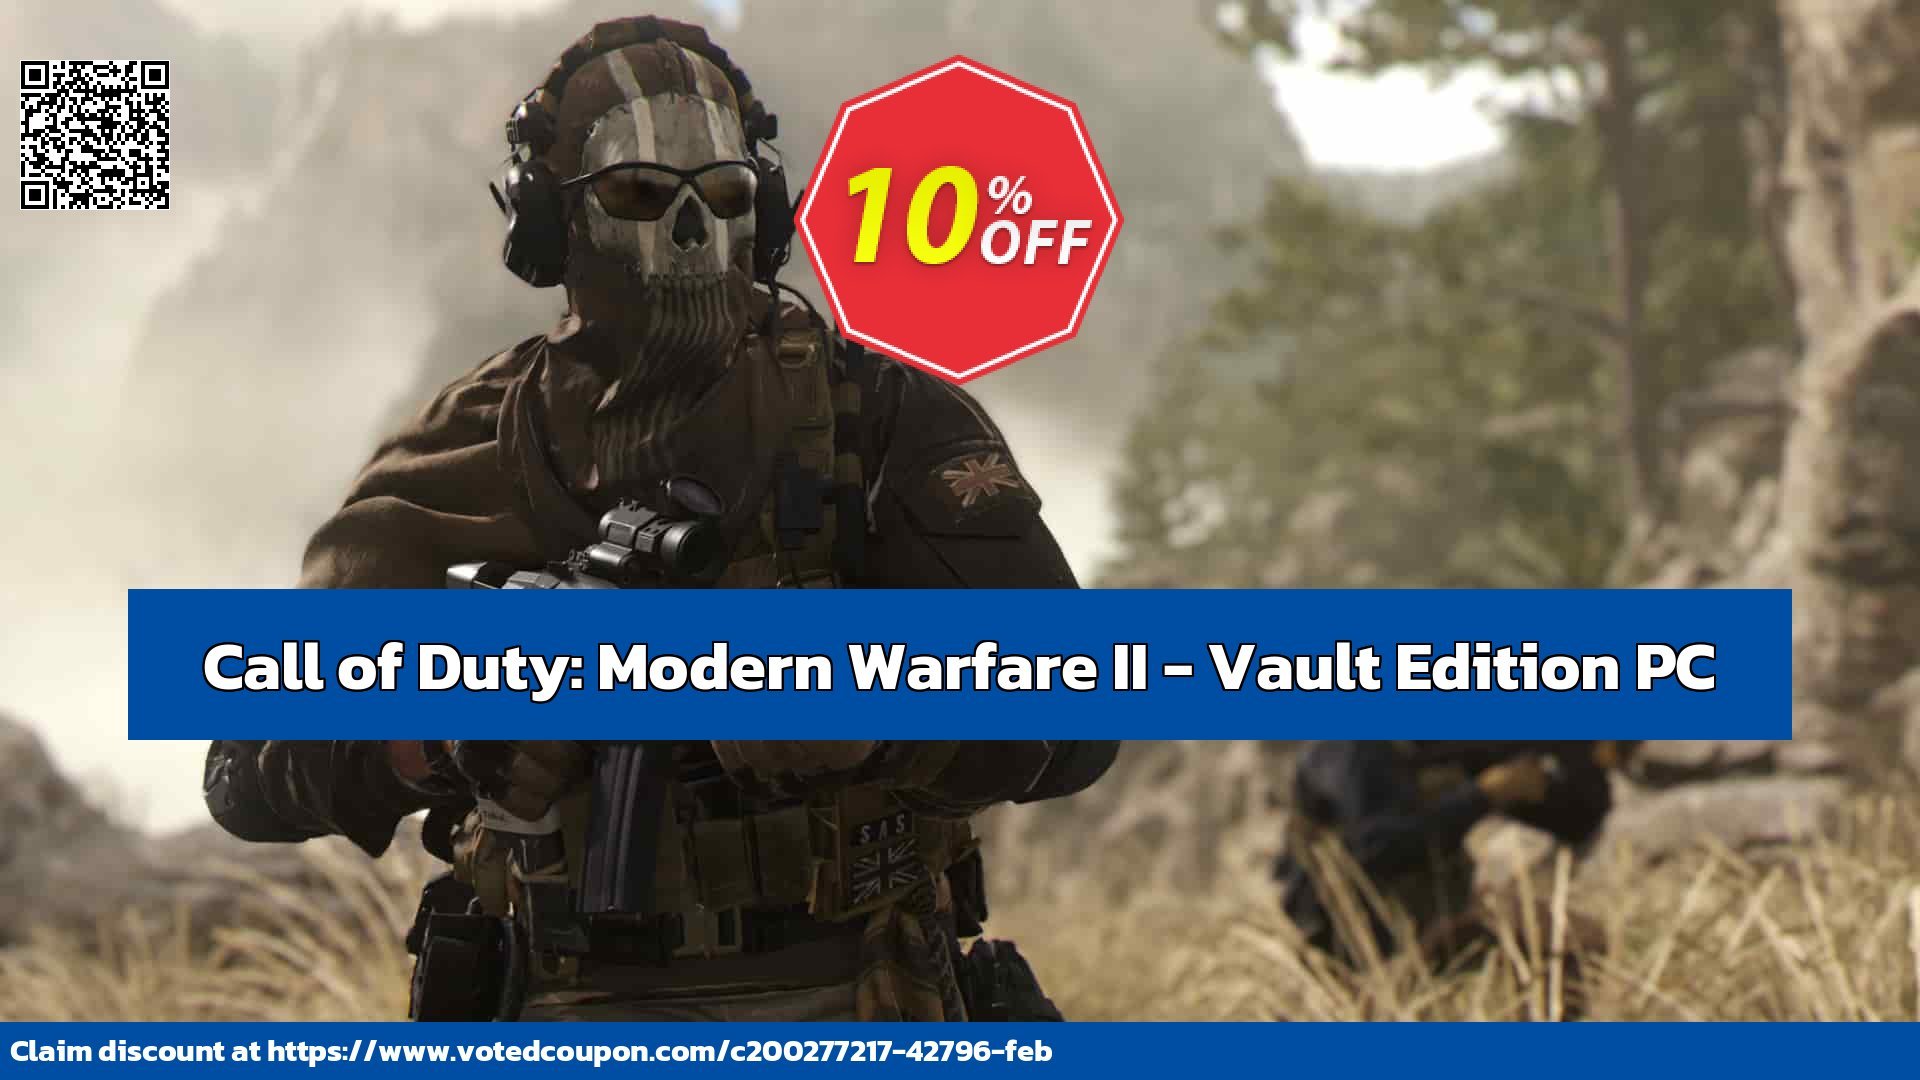 Call of Duty: Modern Warfare II - Vault Edition PC Coupon Code May 2024, 10% OFF - VotedCoupon